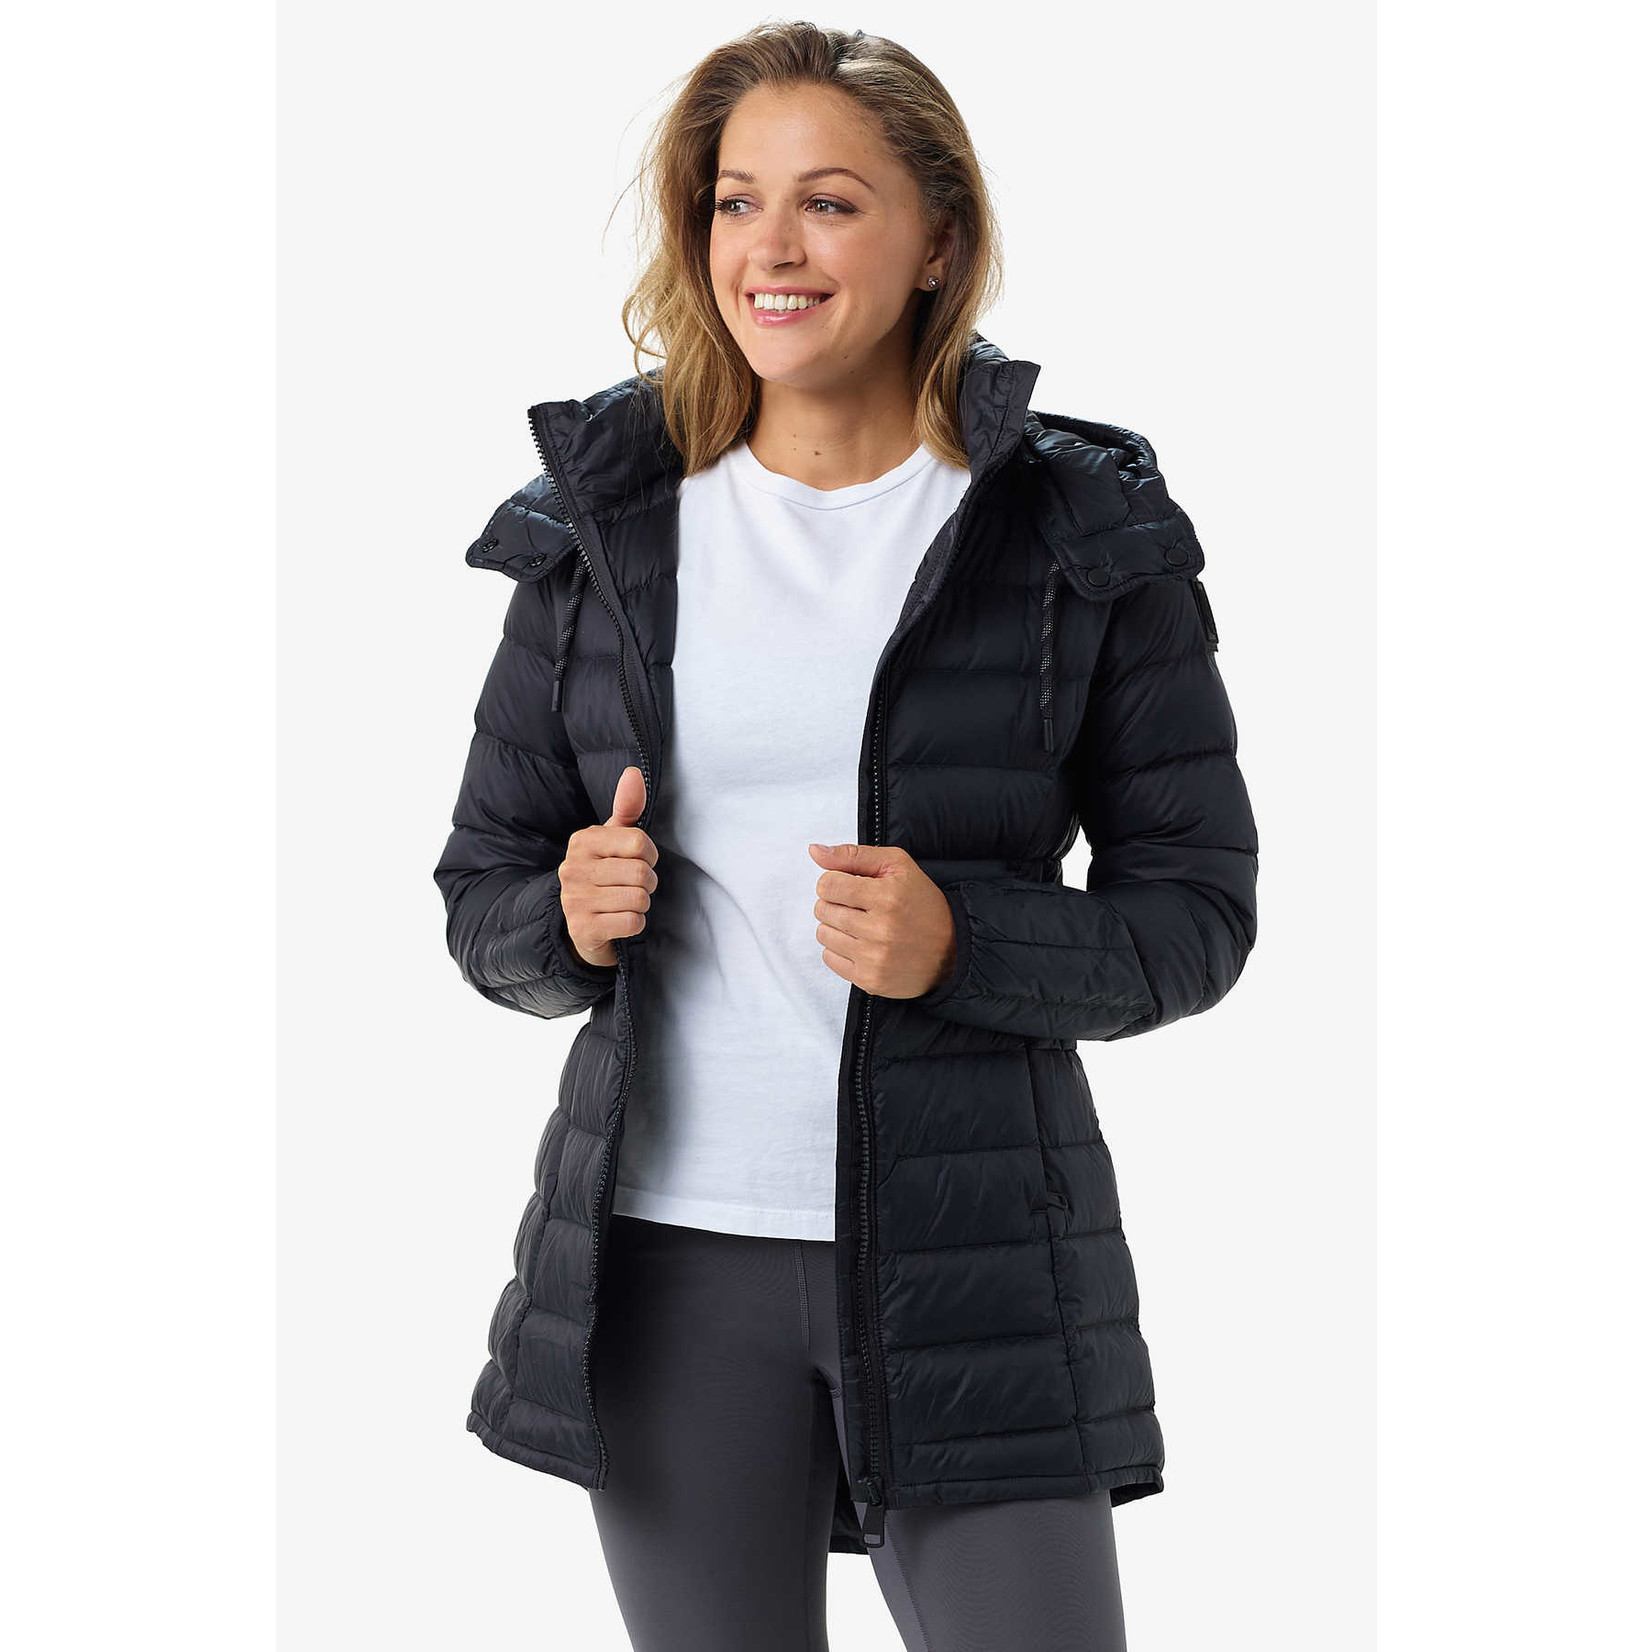 LOLË Claudia Insulated Down Jacket Women's